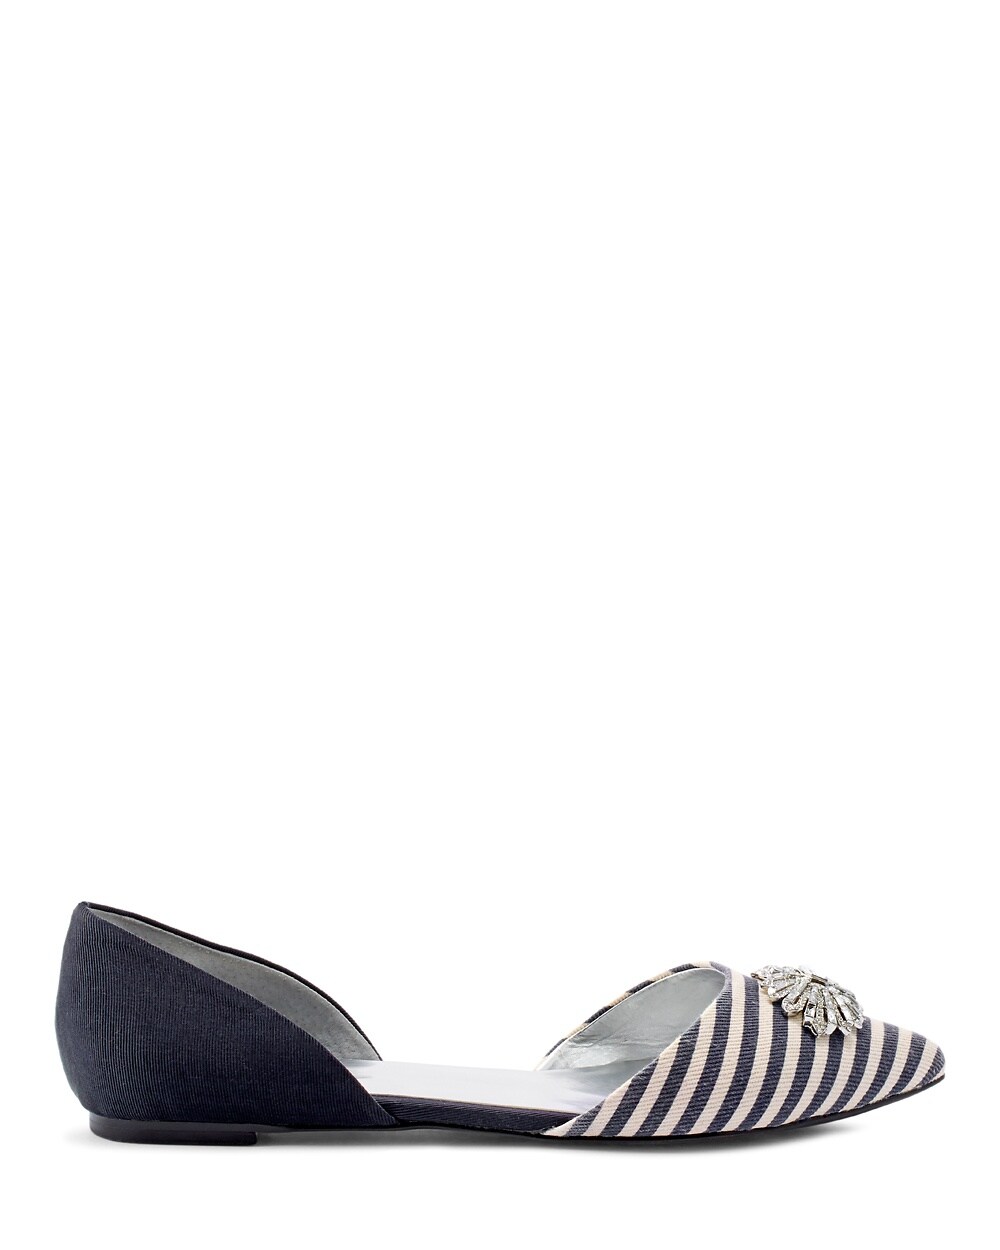 D'Orsay Embellished Flats in Nautical Stripe